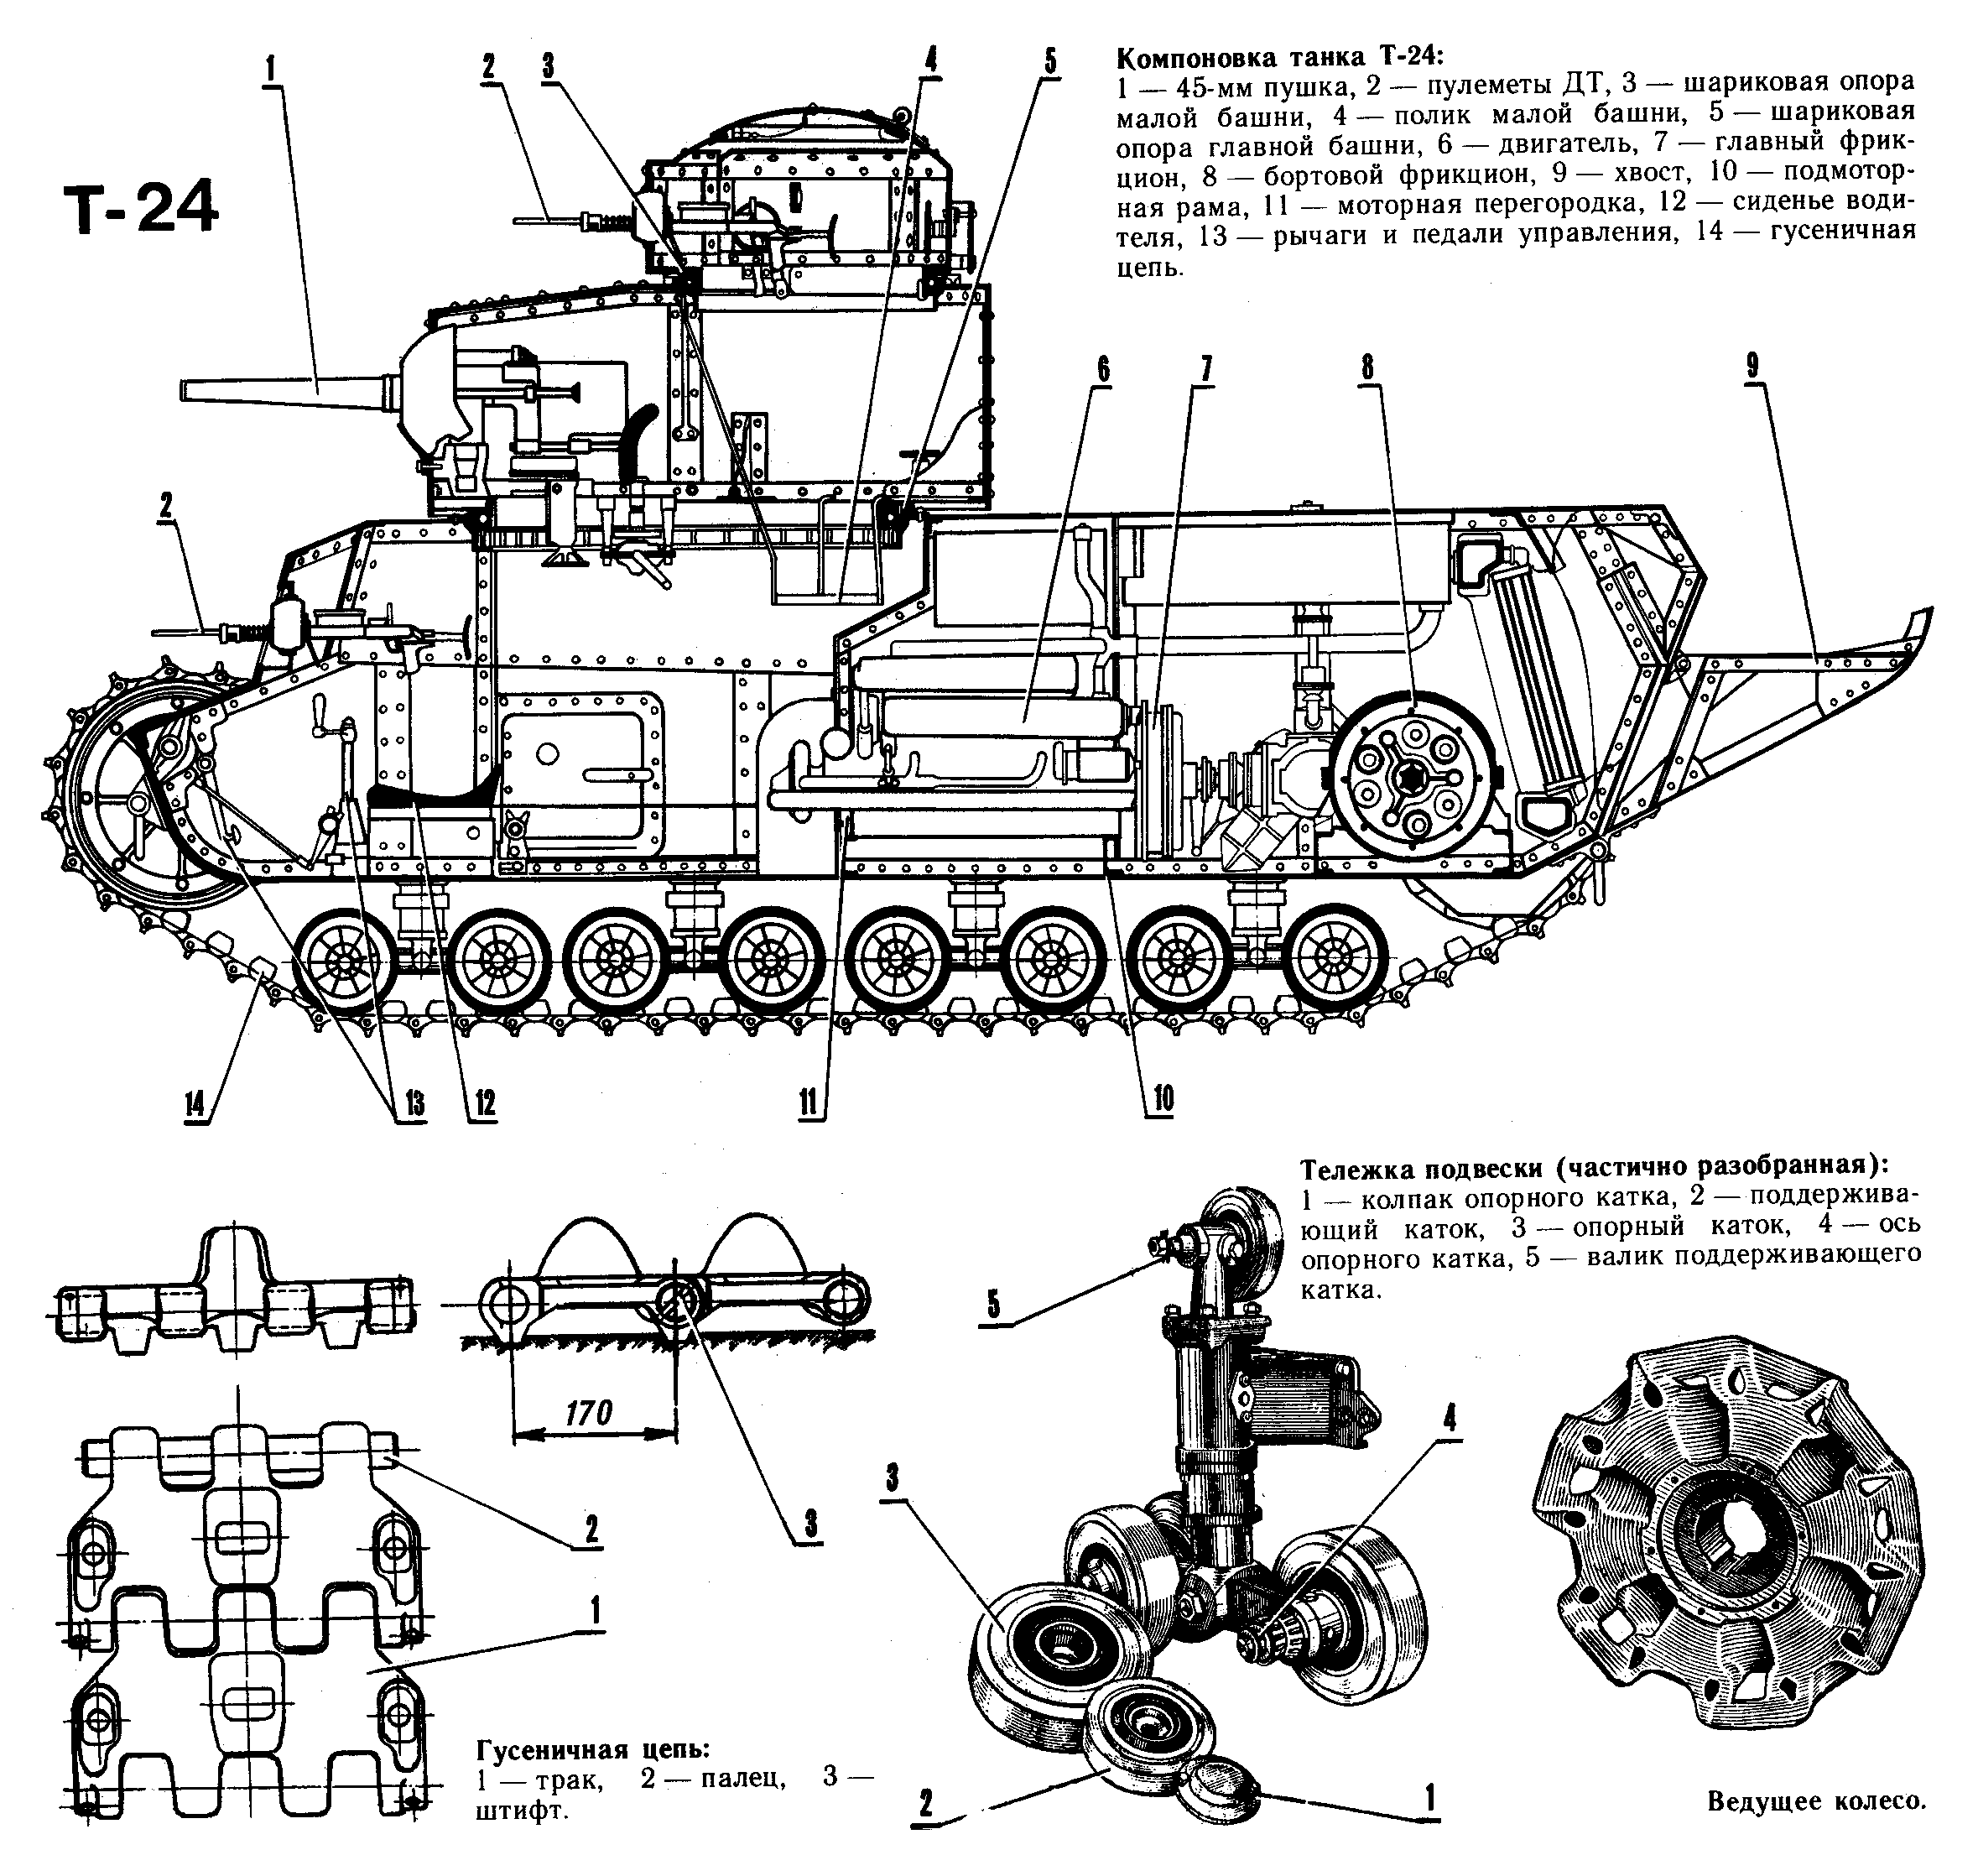 A technical drawing of the T-24 detailing the interior design, tracks, and suspension